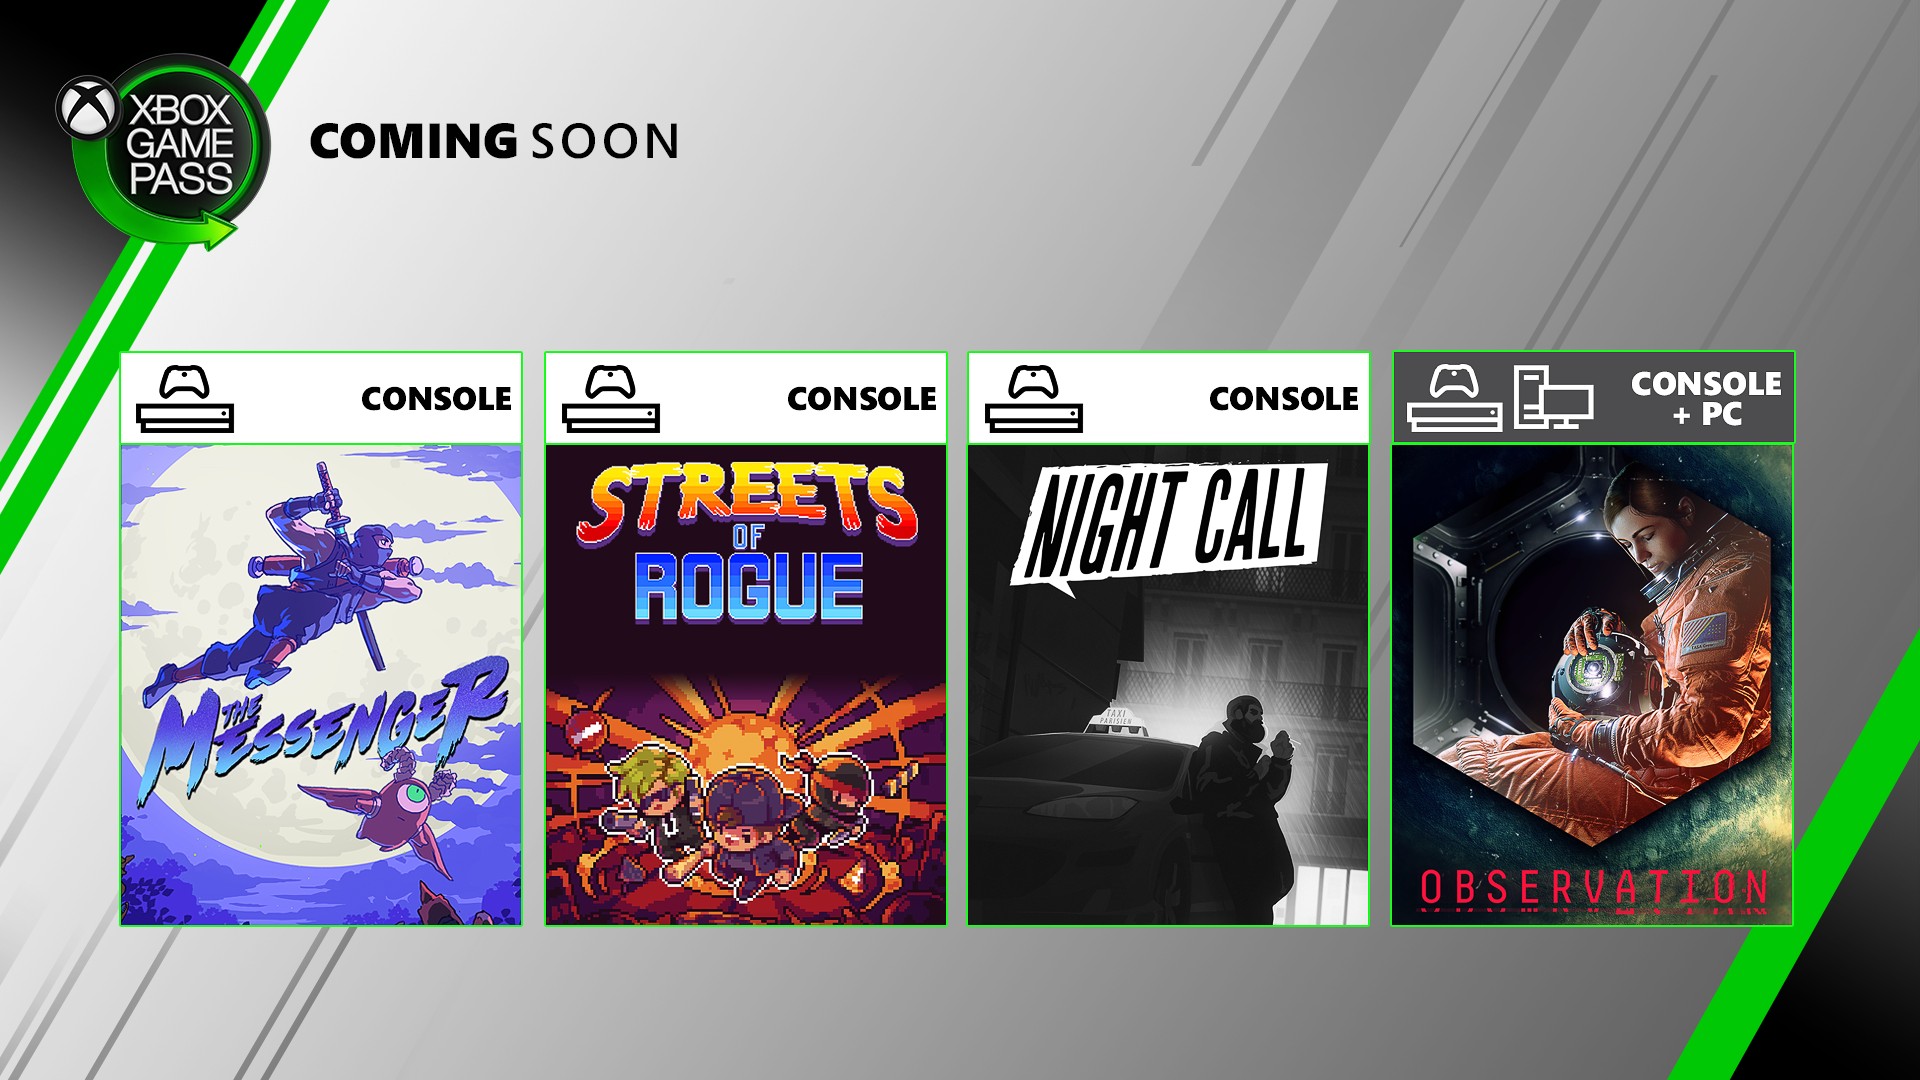 all games coming to game pass